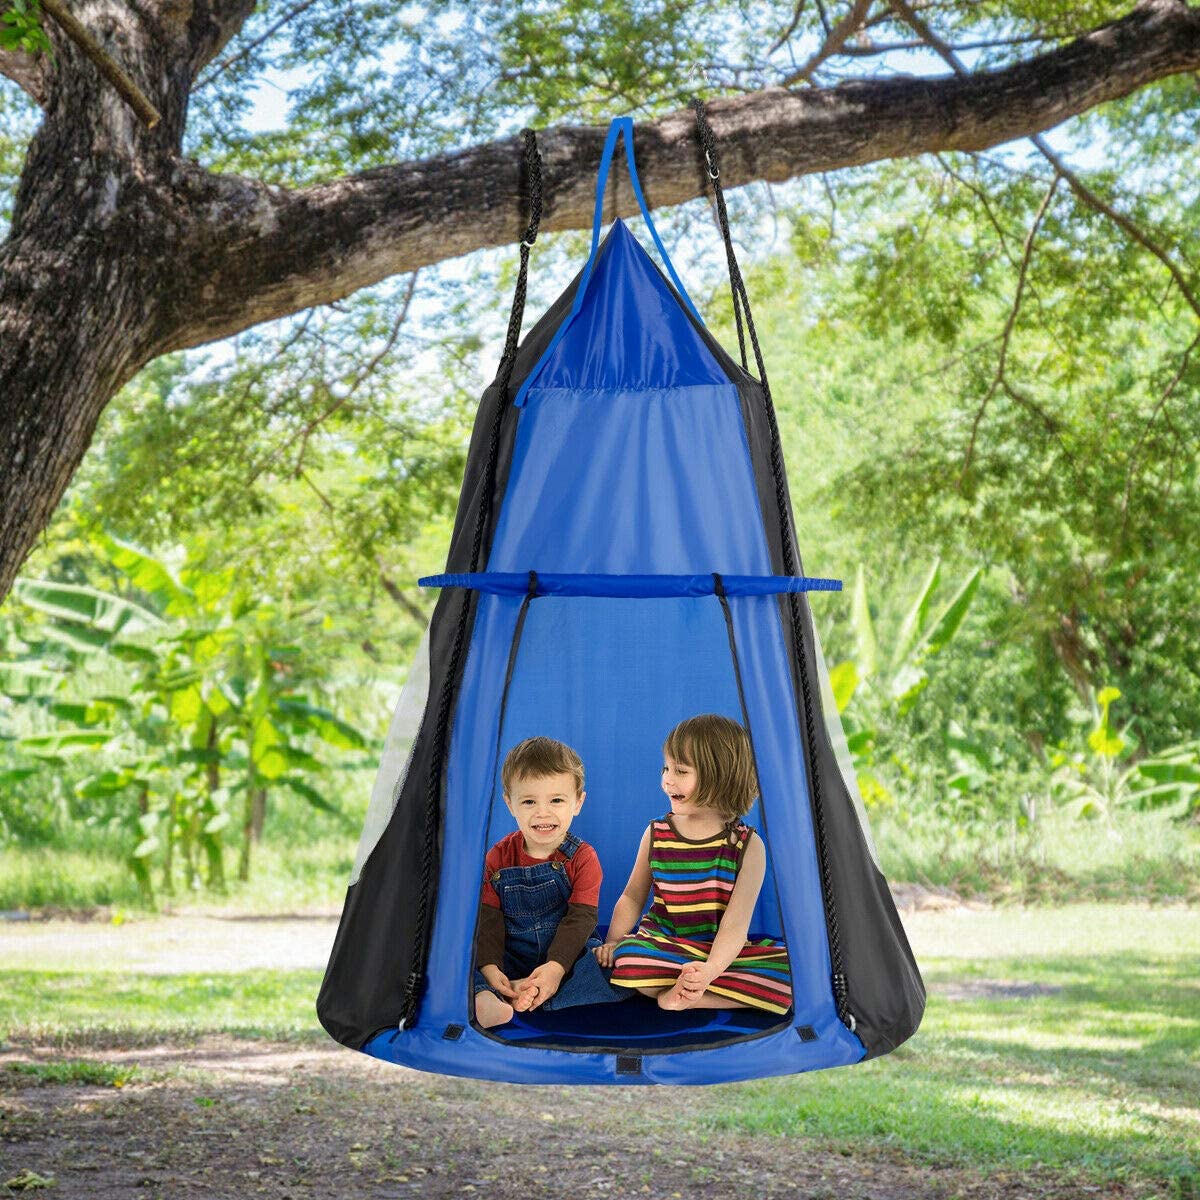 Benefits Of Buying Hanging Tents for Kids